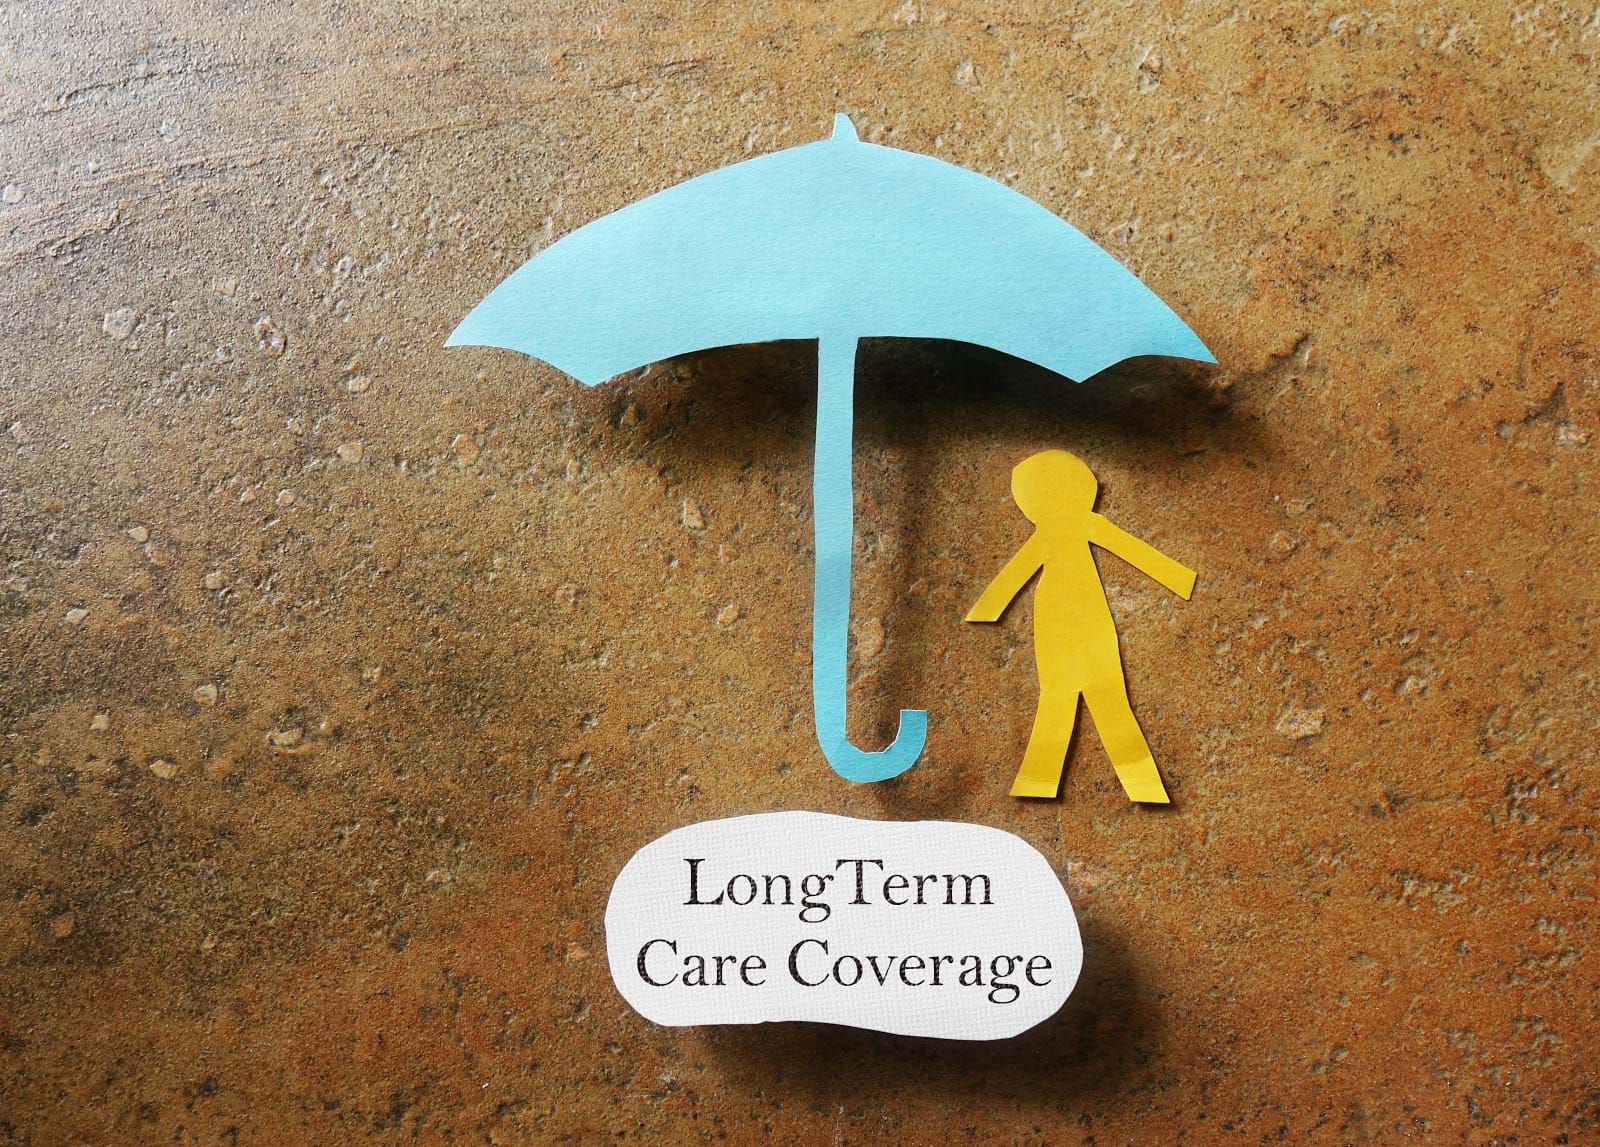 The Long Term Care Challenge